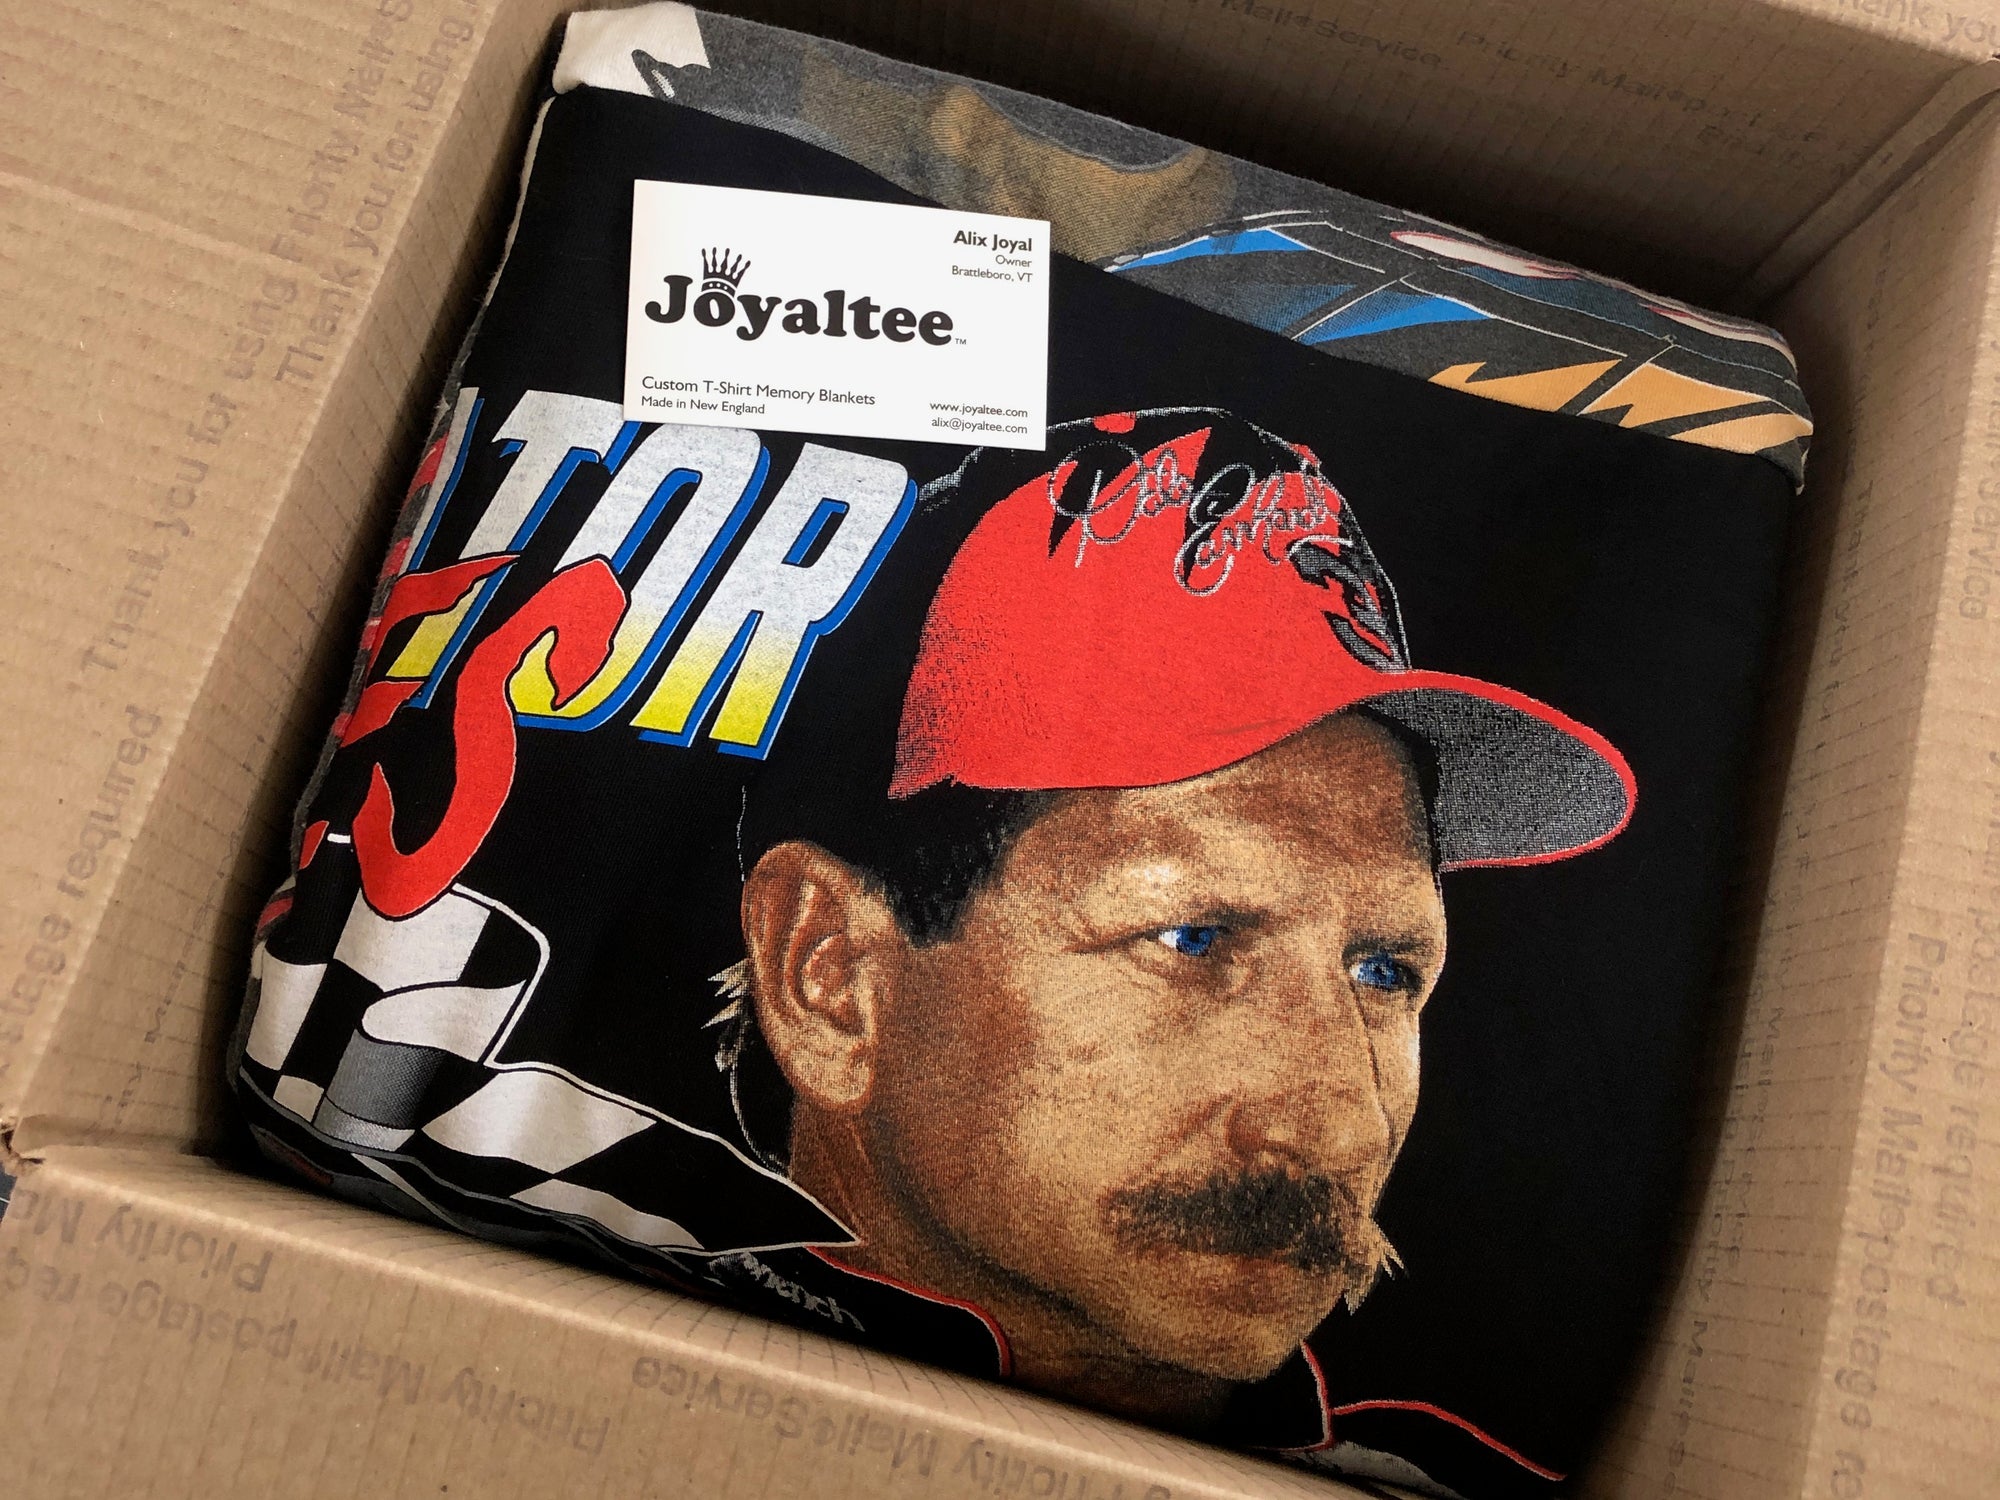 Dale Earnhardt #3 NASCAR Upcycled T-Shirt Memory Blanket from my Client's Favorite old t's.